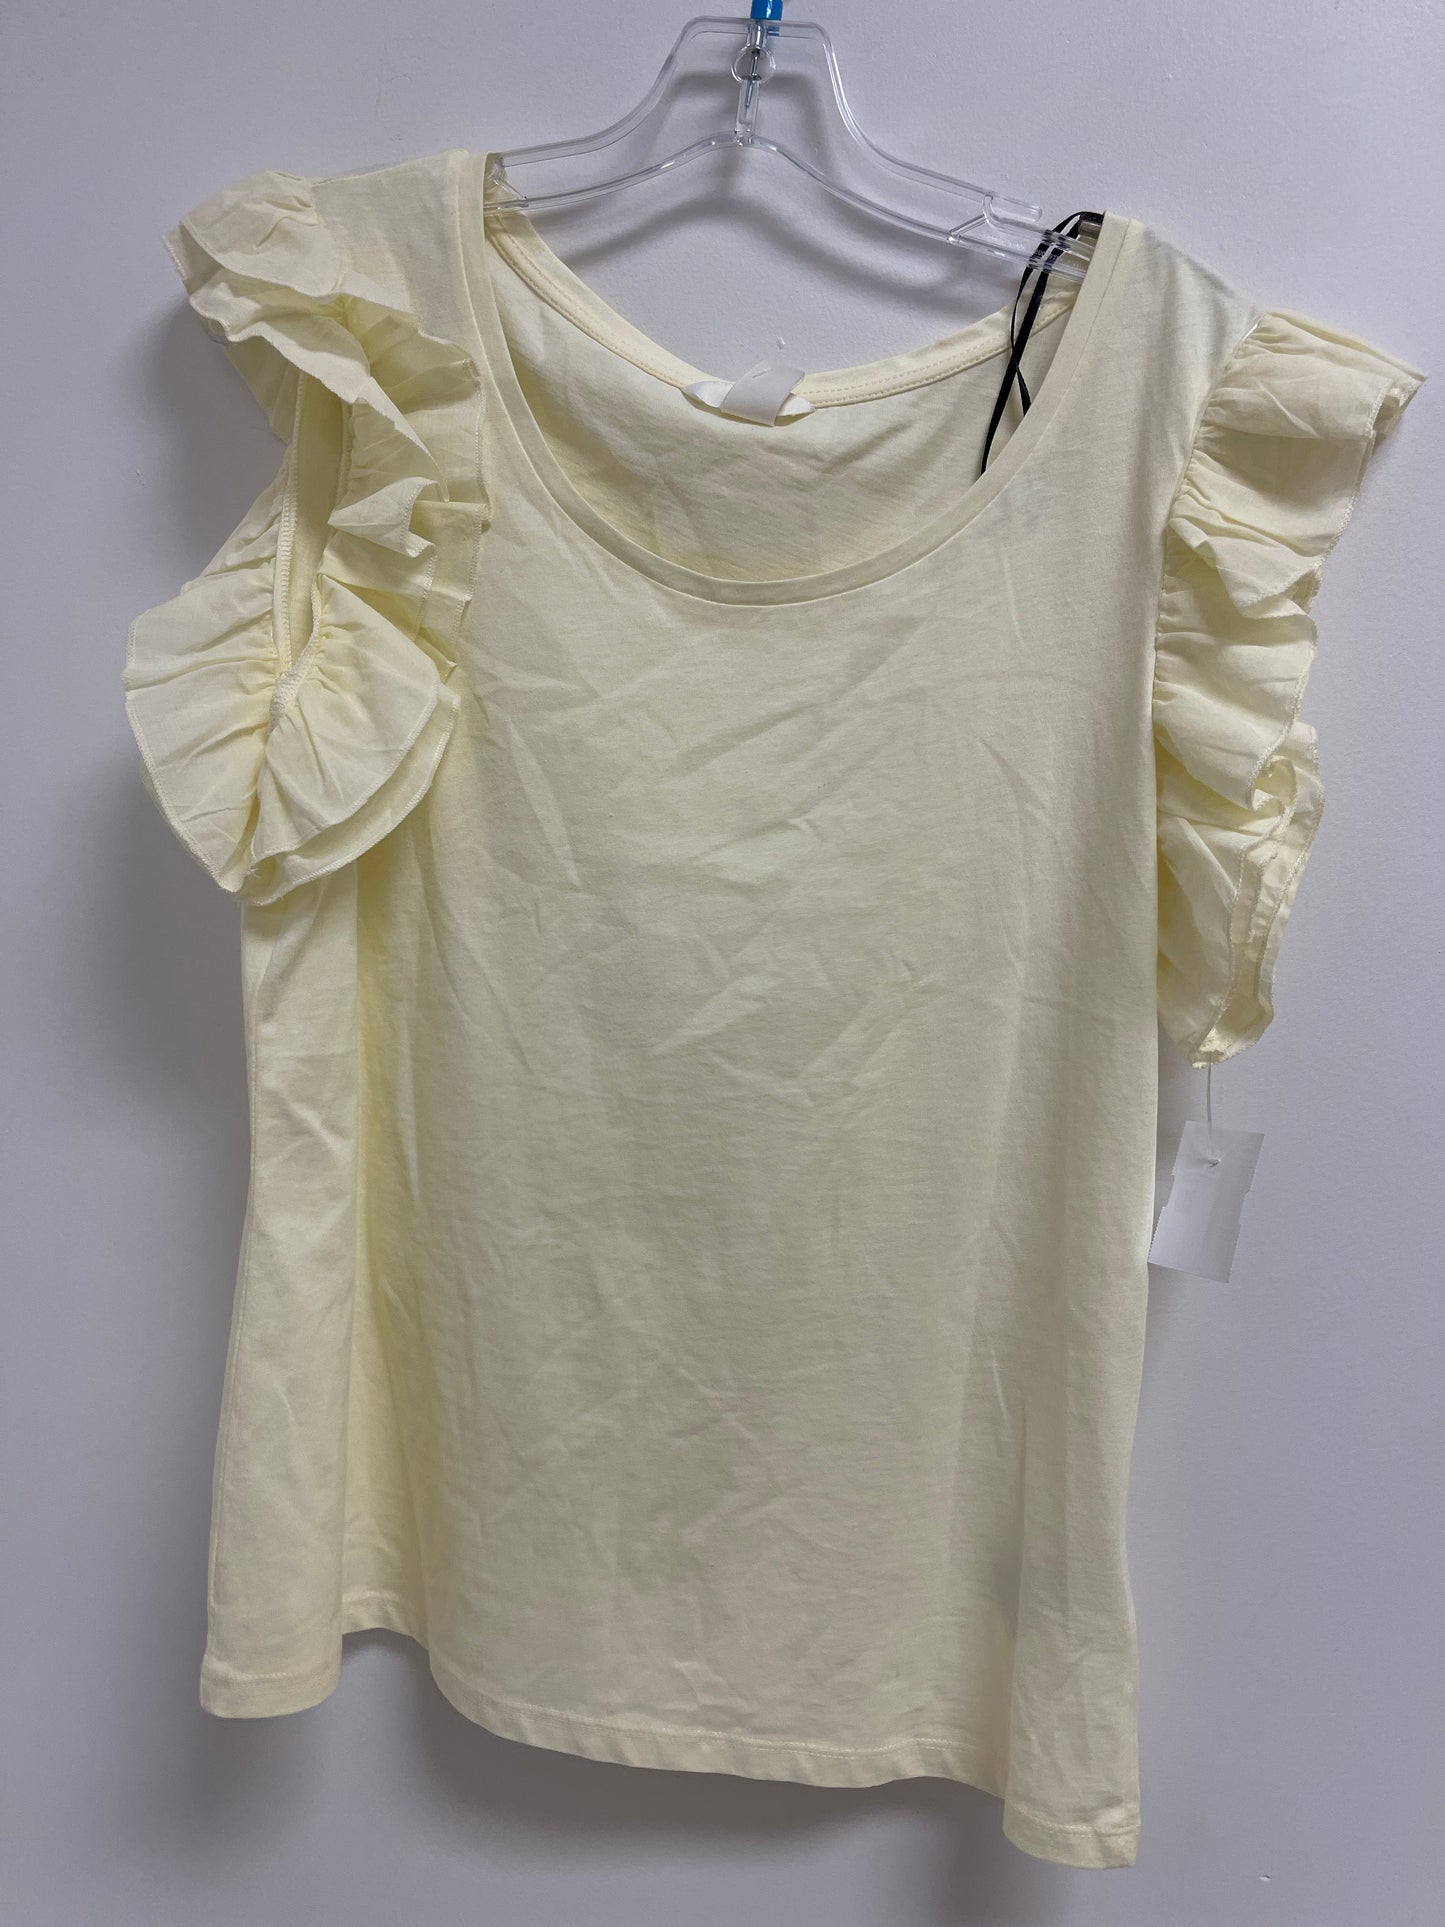 Yellow Top Short Sleeve H&m, Size M